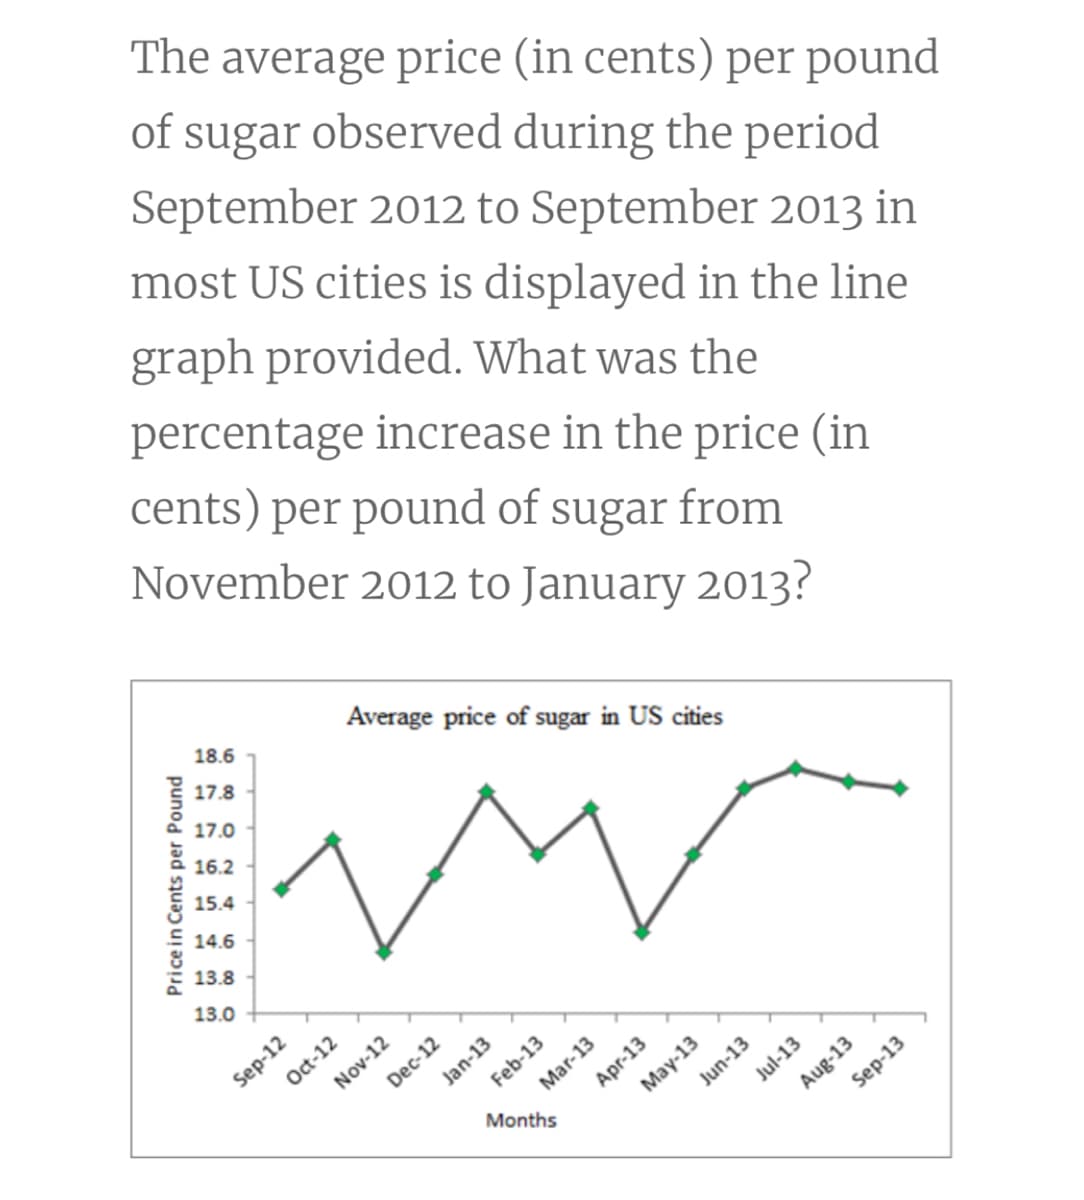 The average price (in cents) per pound
of sugar observed during the period
September 2012 to September 2013 in
most US cities is displayed in the line
graph provided. What was the
percentage increase in the price (in
cents) per pound of sugar from
November 2012 to January 2013?
18.6
Average price of sugar in US cities
17.8
17.0
16.2
15.4
14.6
13.8
13.0
Sep-12
Nov-12
Dec-12
Jan-13
Mar-13
Apr-13
Feb-13
May-13
Jun-13
Jul-13
Sep-13
Oct-12
Aug-13
